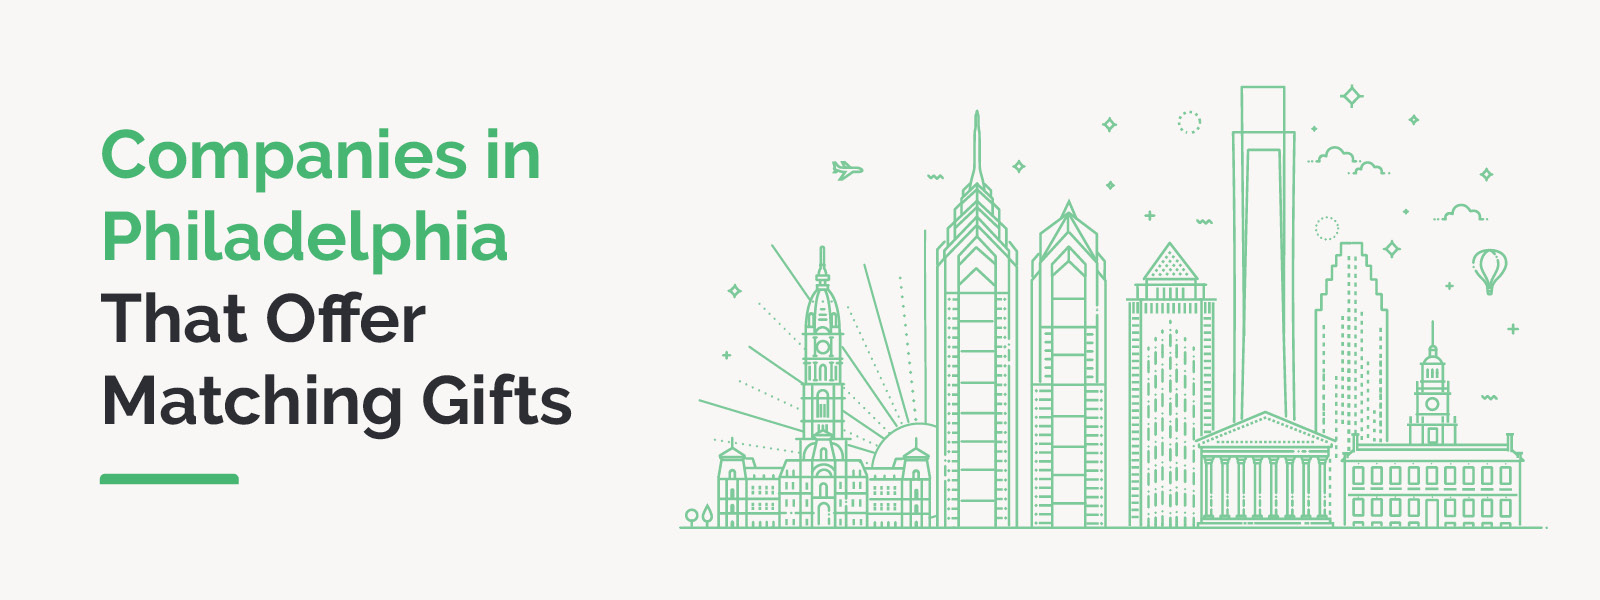 Learn about the top companies in Philadelphia that offer matching gift programs.